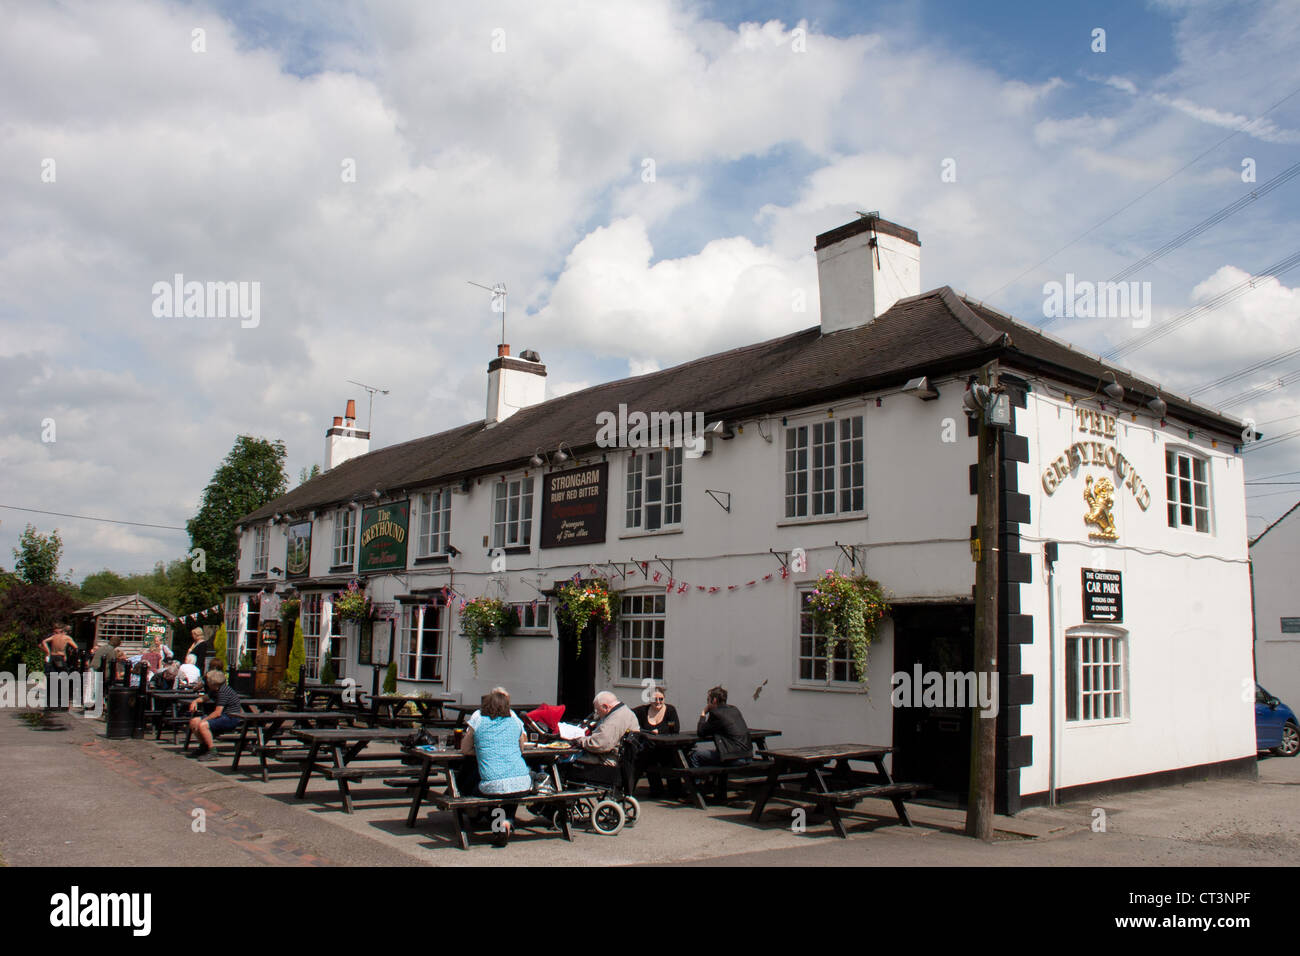 This white Greyhound pub with eating facilities both indoors and outdoors is in Hawkesbury at the junctions of two canals. Stock Photo